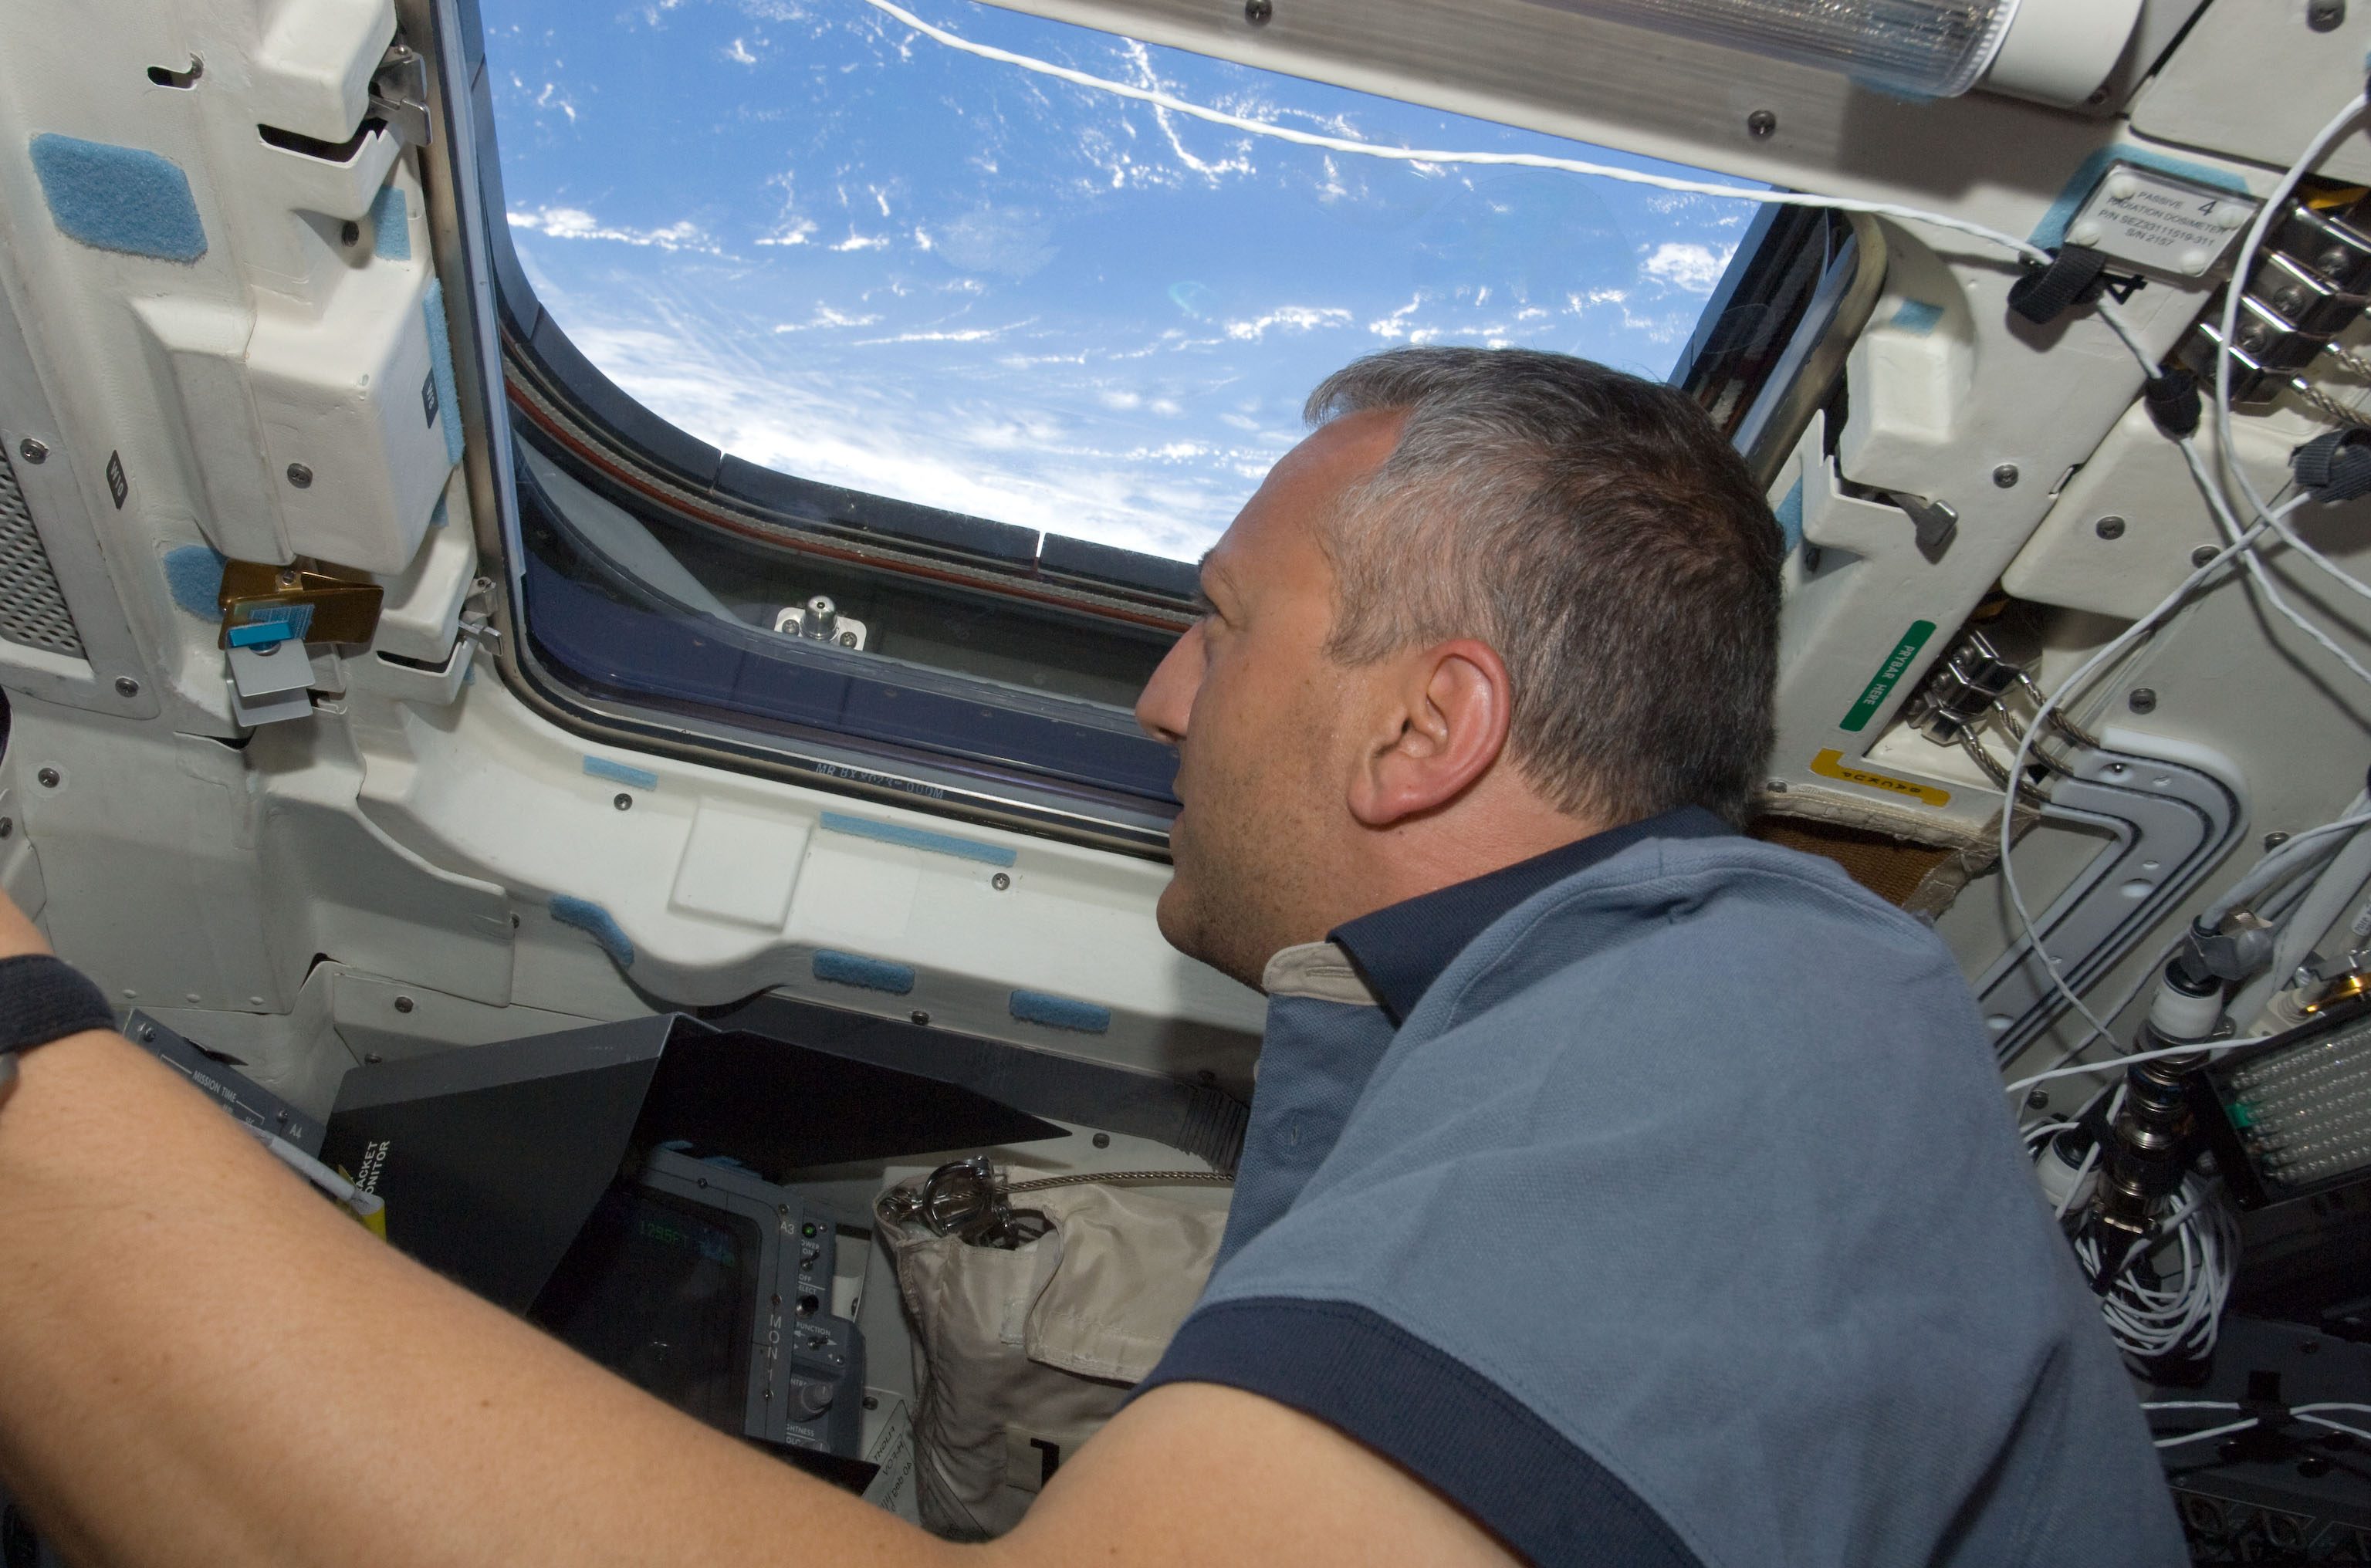 A man looking out of the window of a spacecraft.